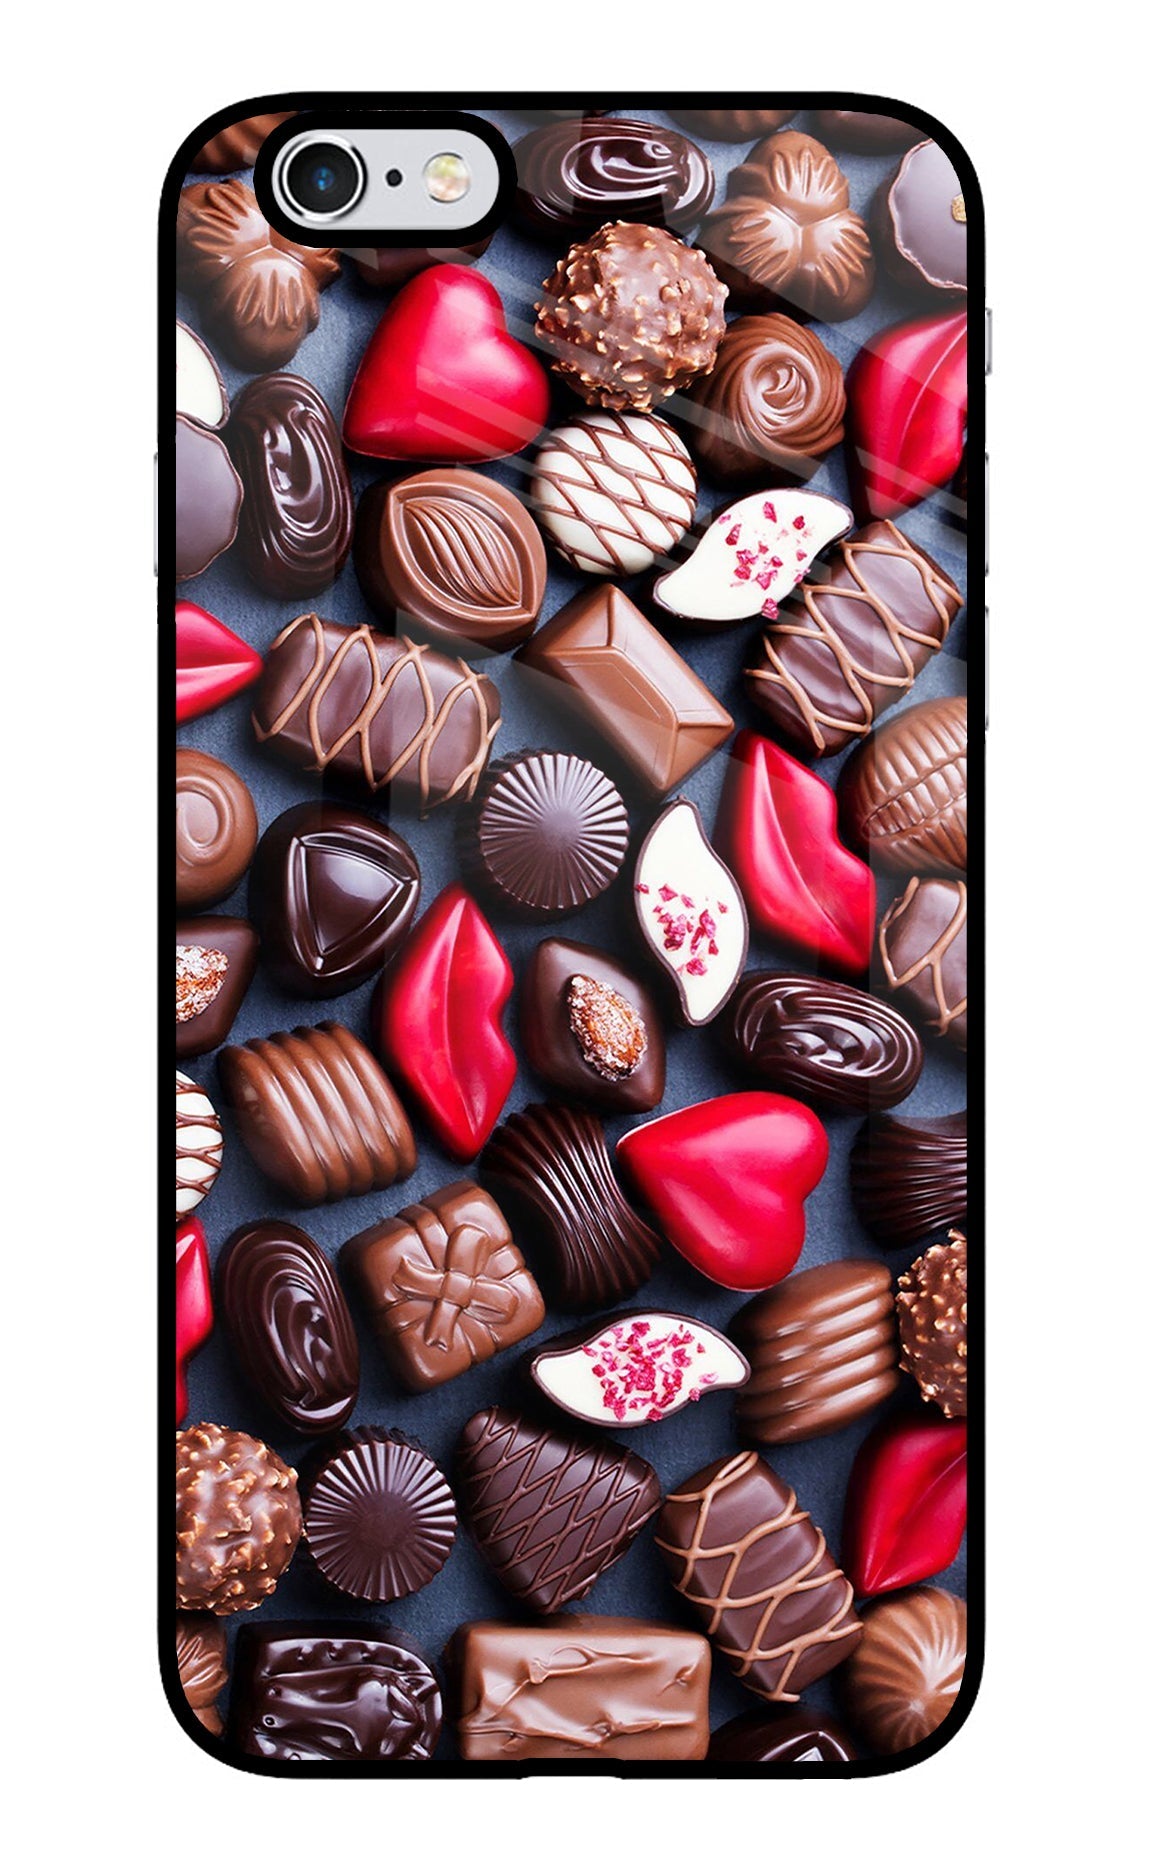 Chocolates iPhone 6/6s Back Cover